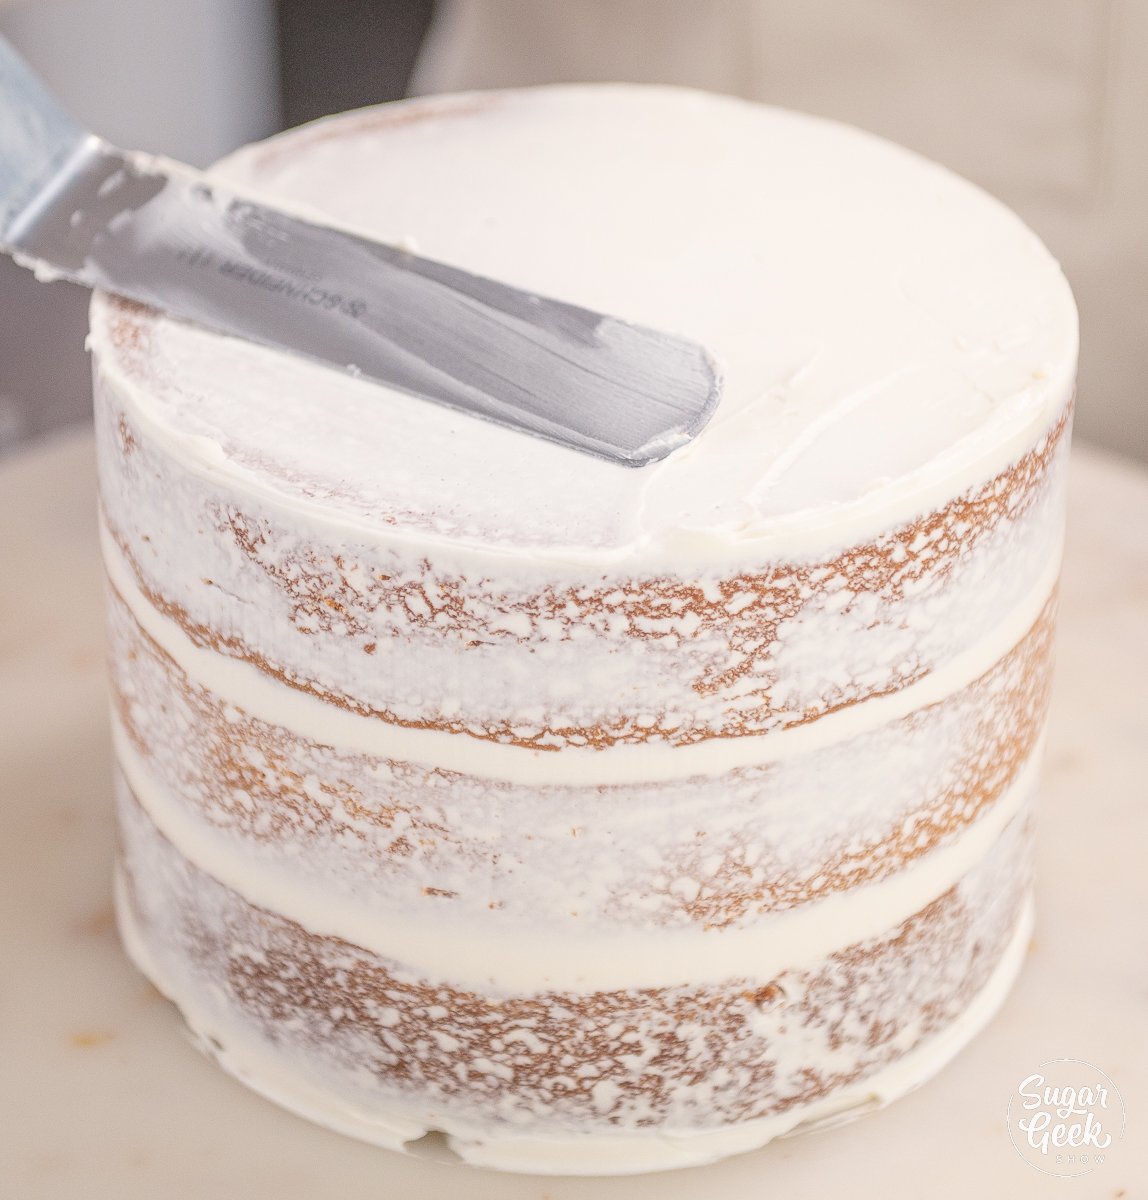 spatula on top of frosted cake